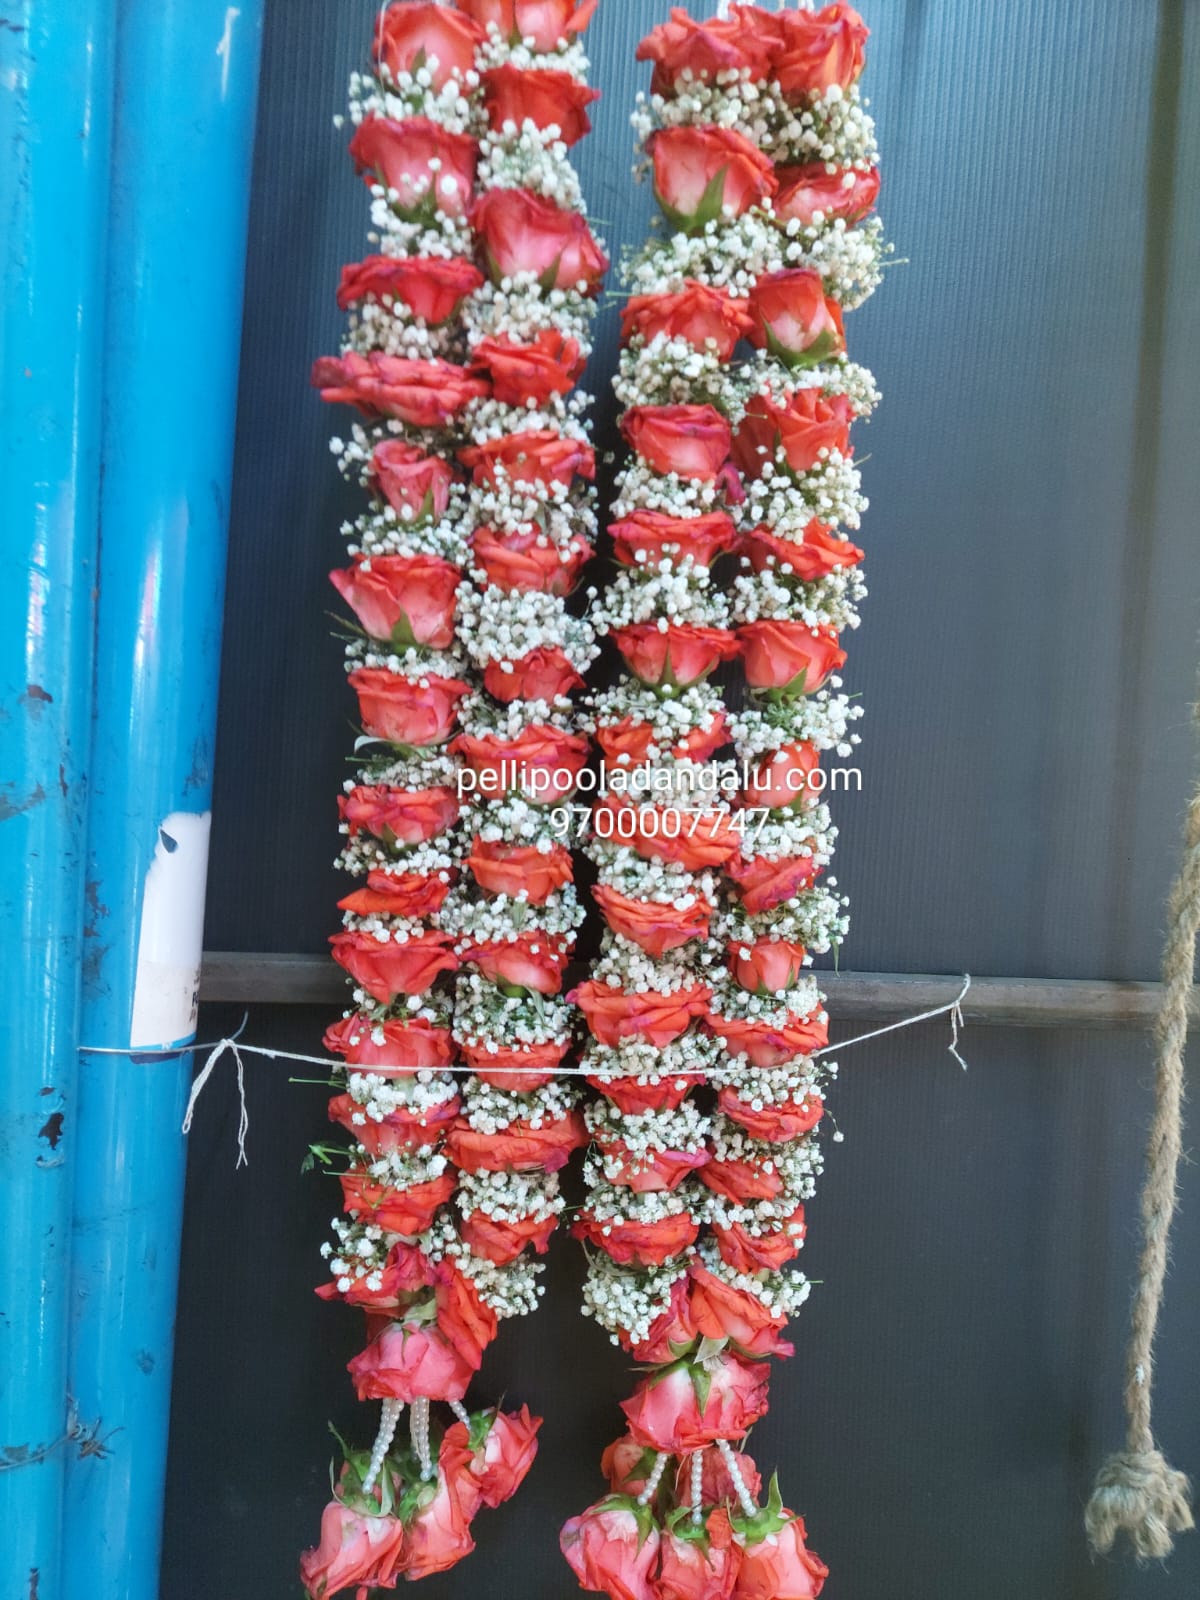 Pelli poola Jada - Got bored of same old Rose petal Garlands? Here is new Baby  Breath Garland design with Chrysanthemum to match your wedding attire…  Perfectly made Garlands by Kalaivani #PellipoolajadaPorur